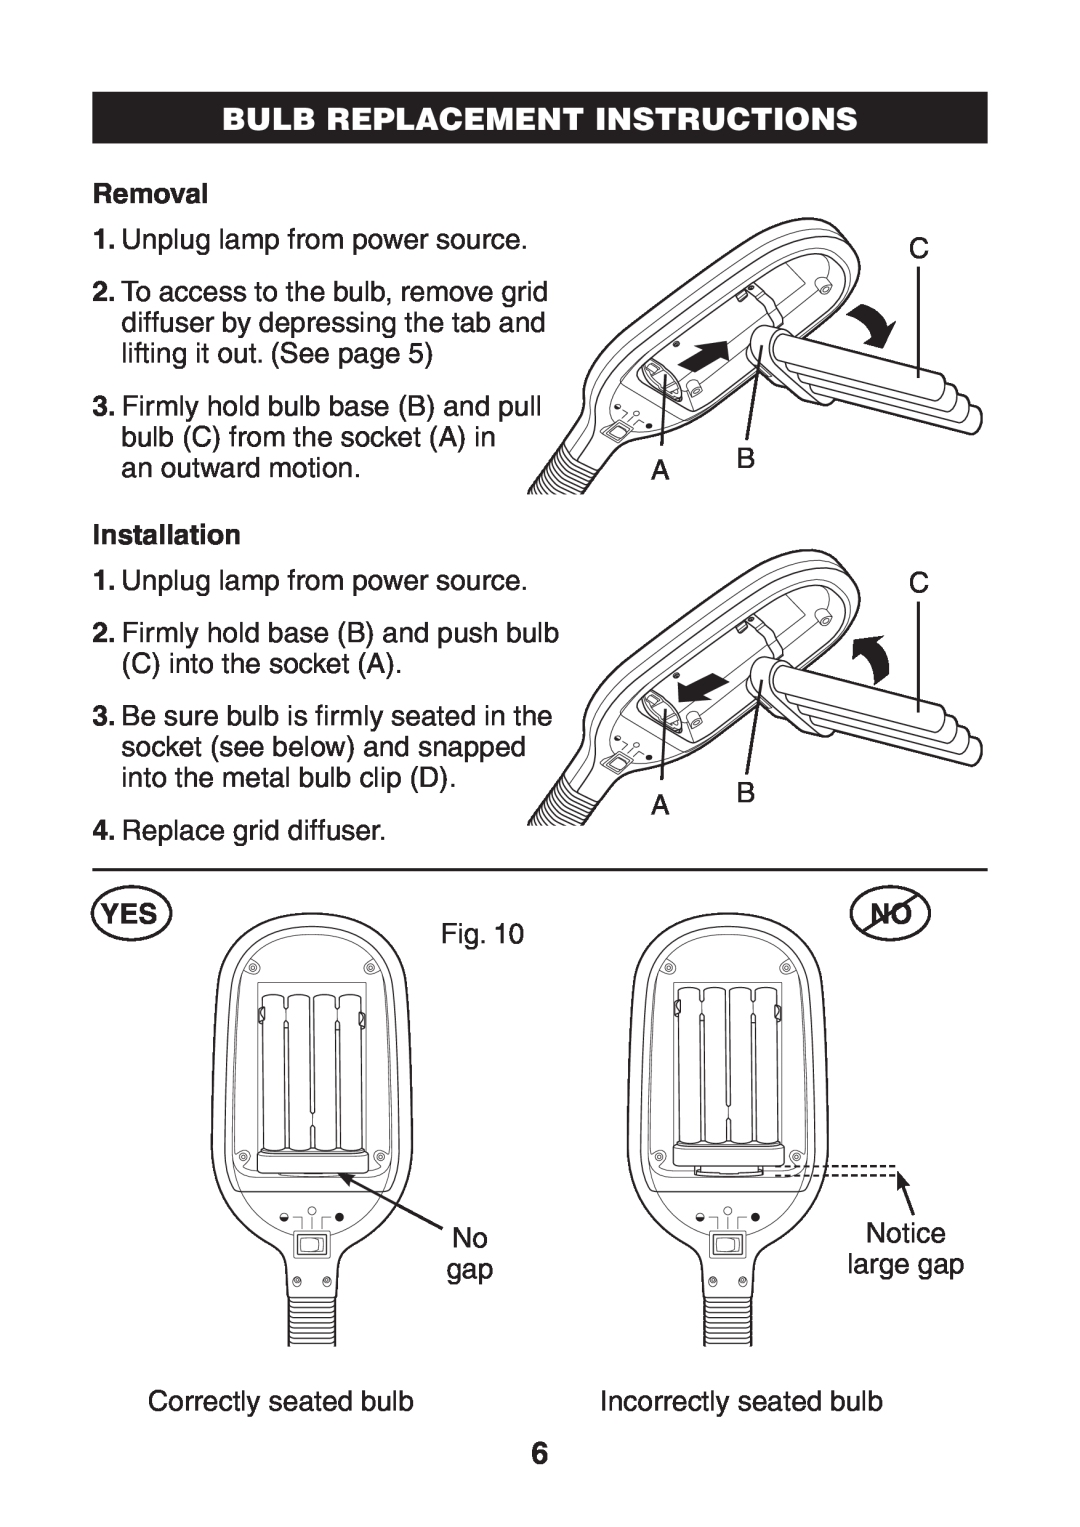 Verilux VD01 manual Bulb Replacement Instructions, Removal, Installation 